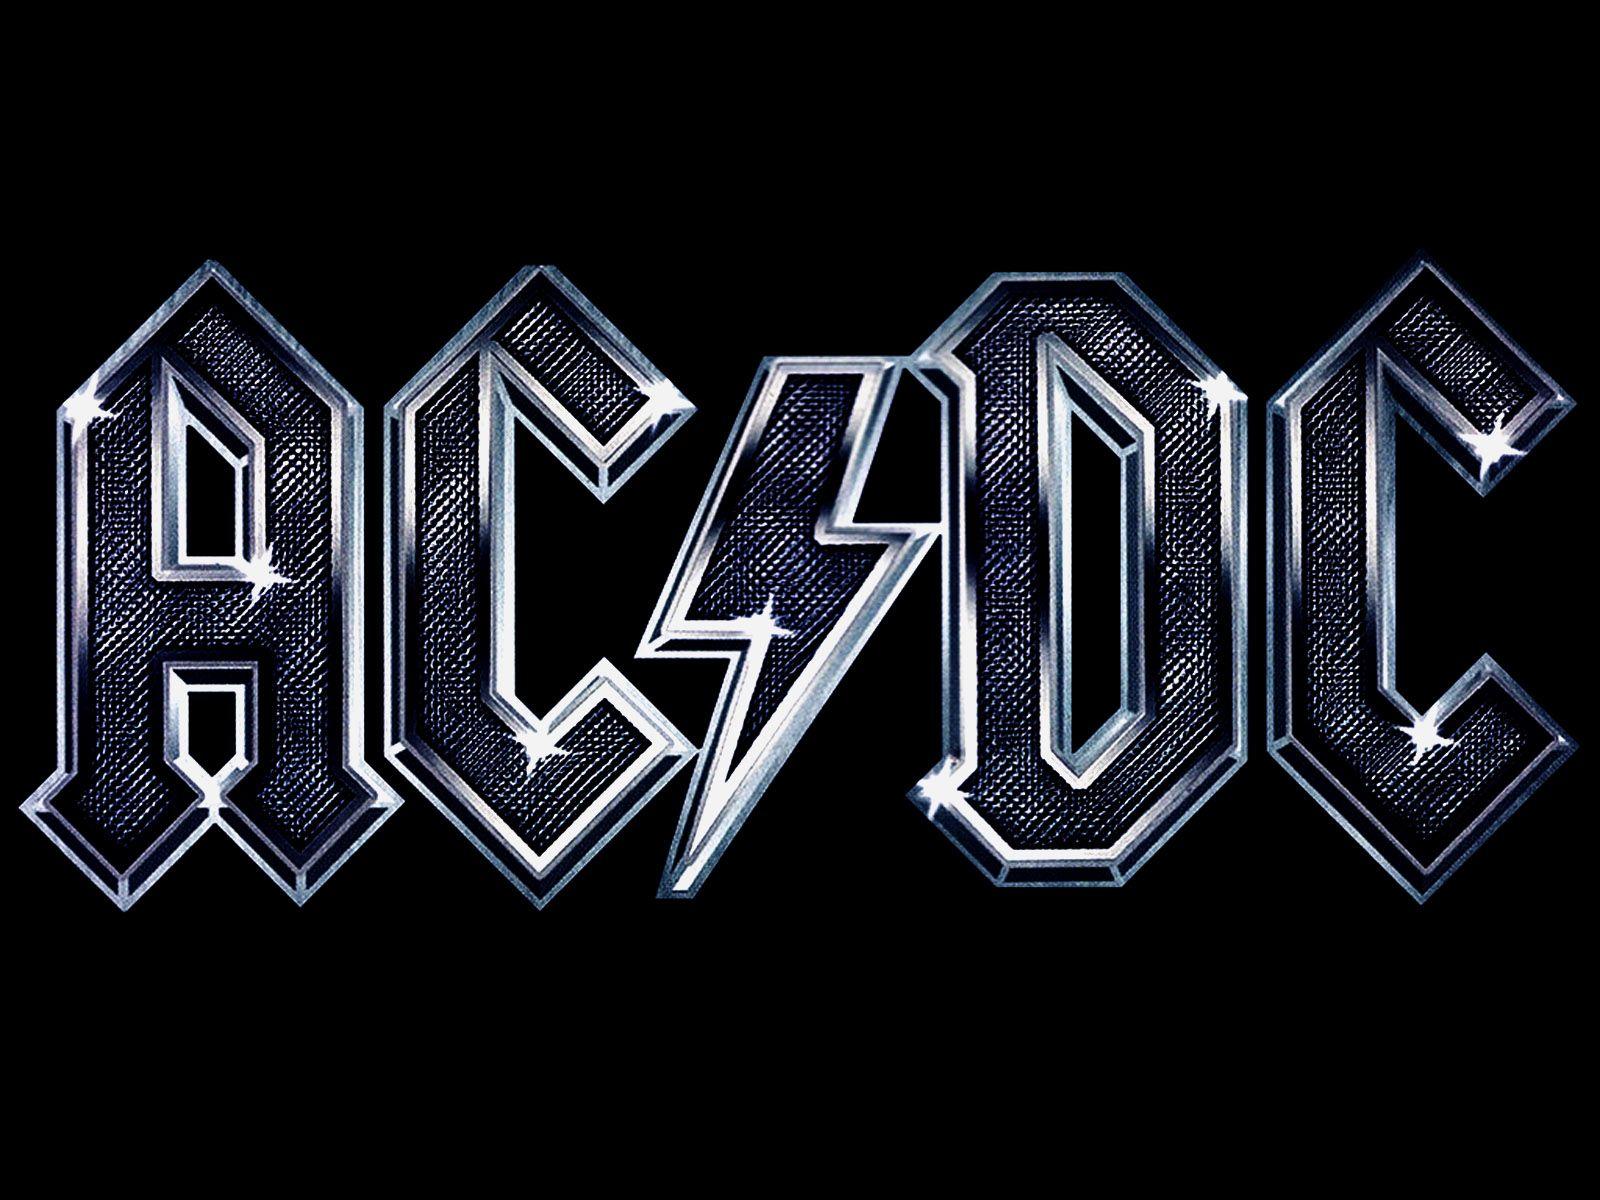 Central Wallpaper: AC / DC Music Band HD Wallpaper Album Covers